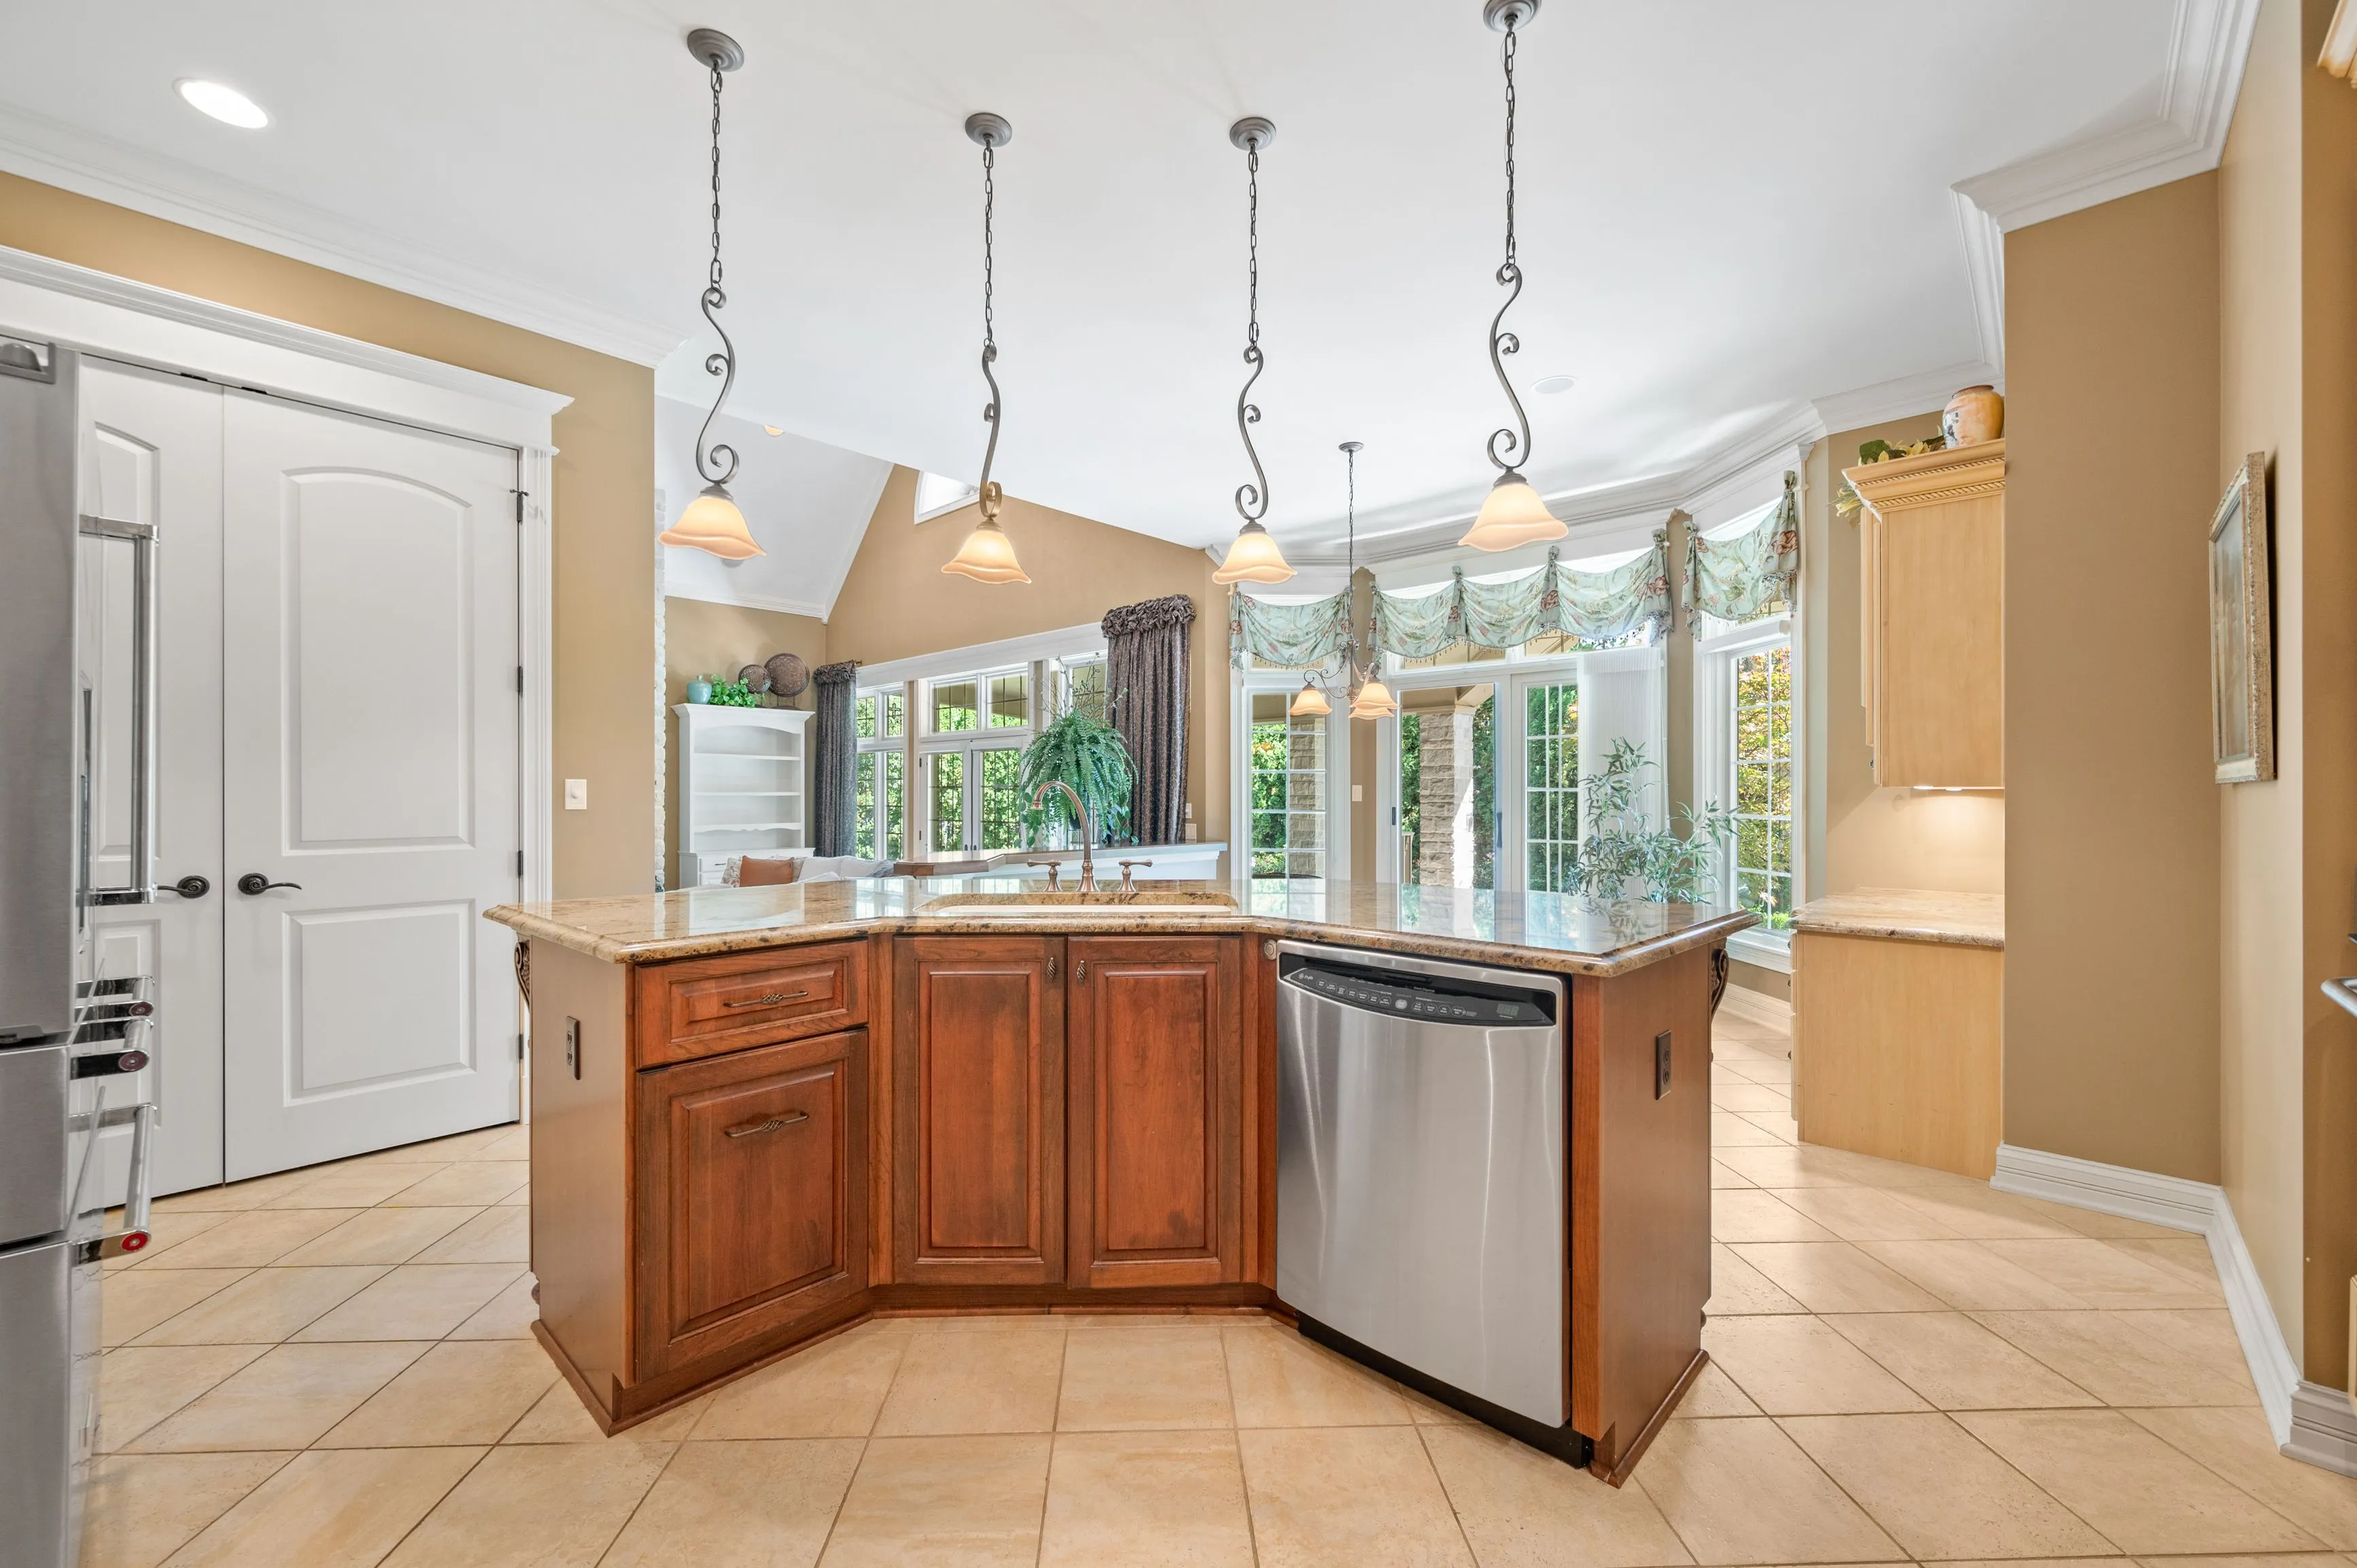 Bright and airy kitchen interior with wooden cabinets, granite countertops, stainless steel appliances, hanging pendant lights, and large windows with garden view.